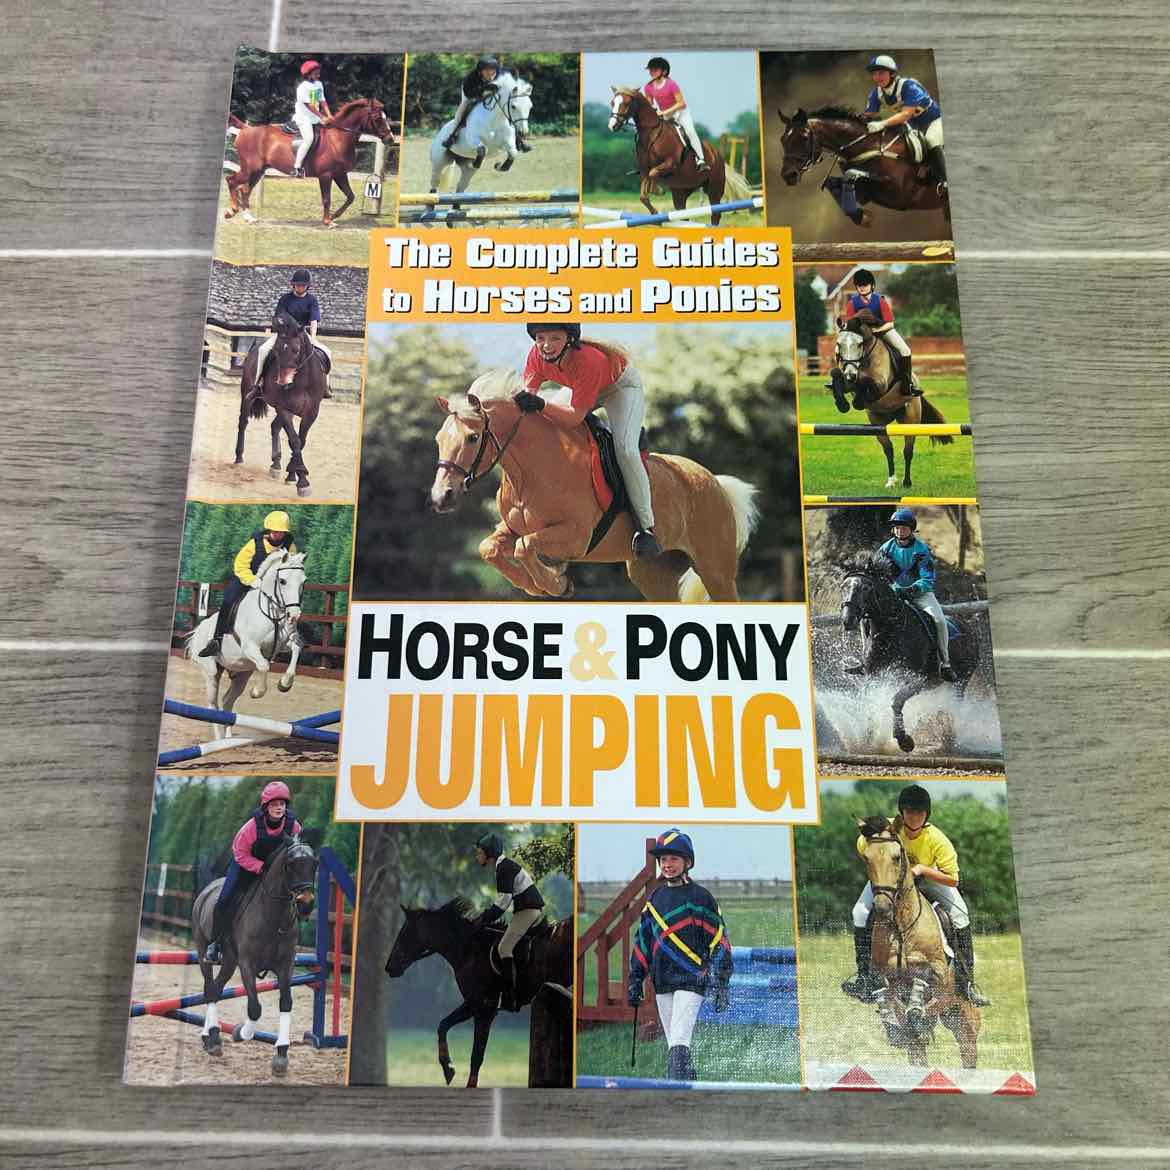 Horse & Pony Jumping - The Complete Guides to Horses and Ponies